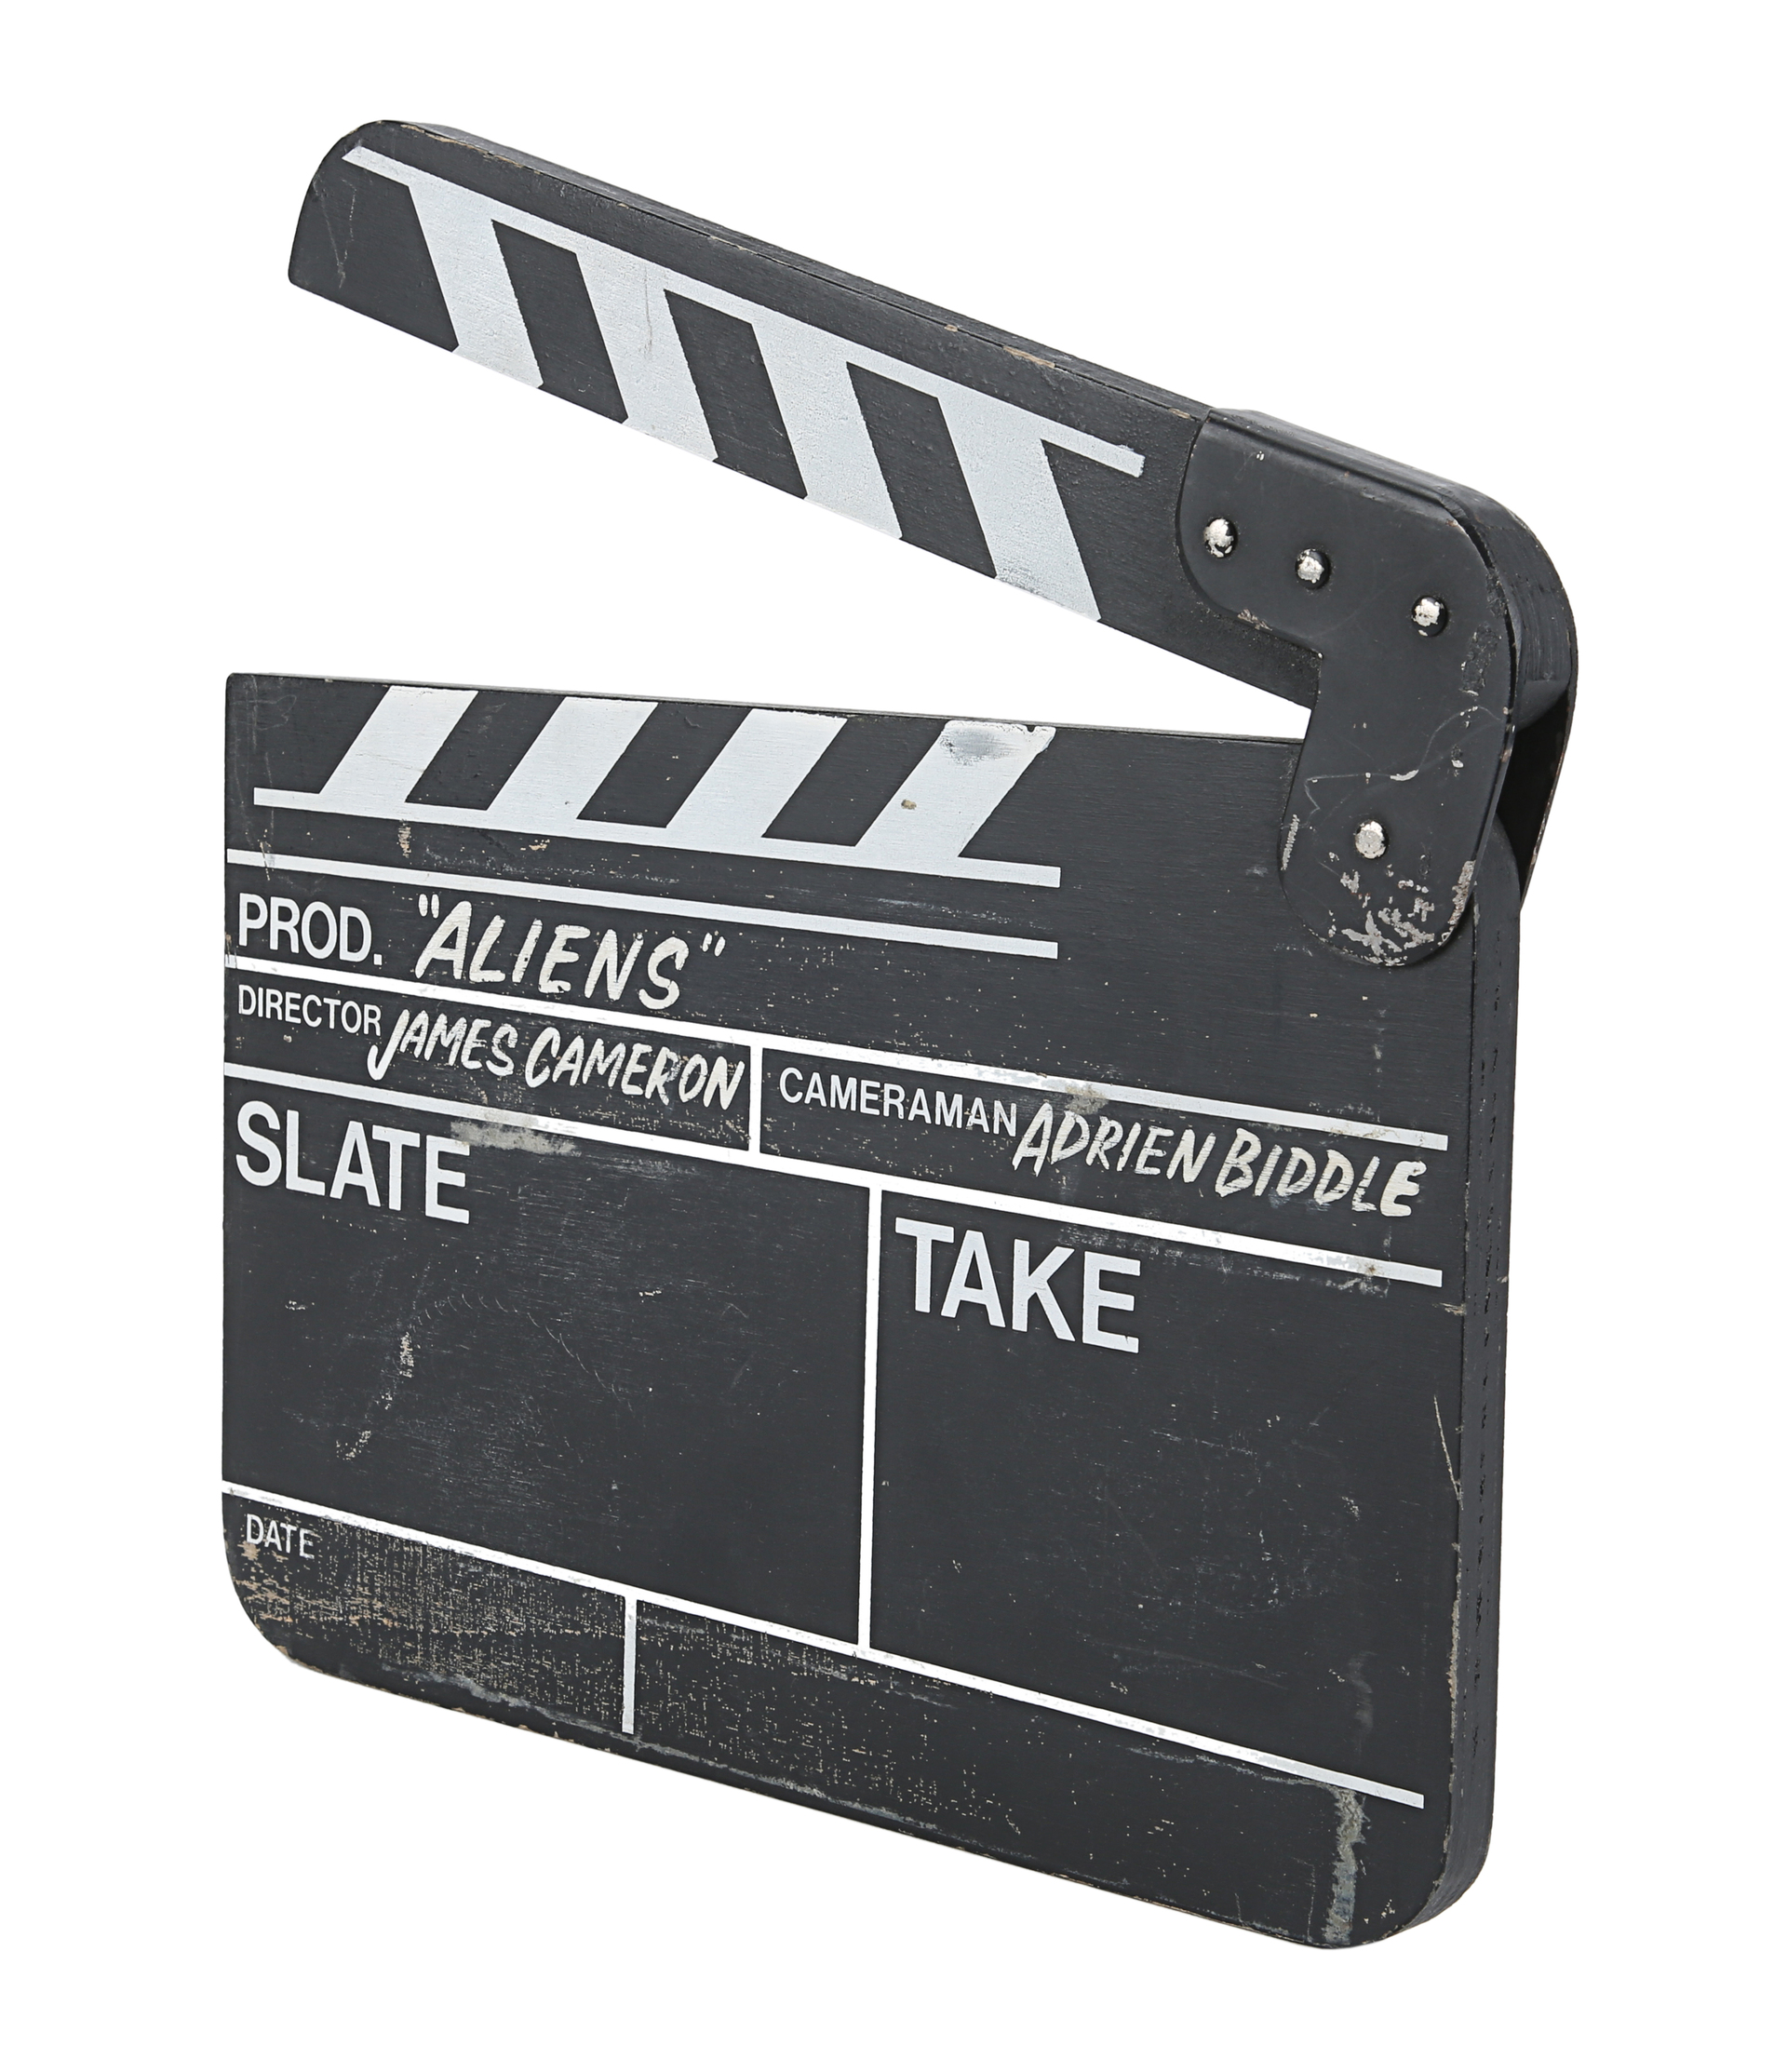 ALIENS (1986) - Production Clapperboard - Image 6 of 8